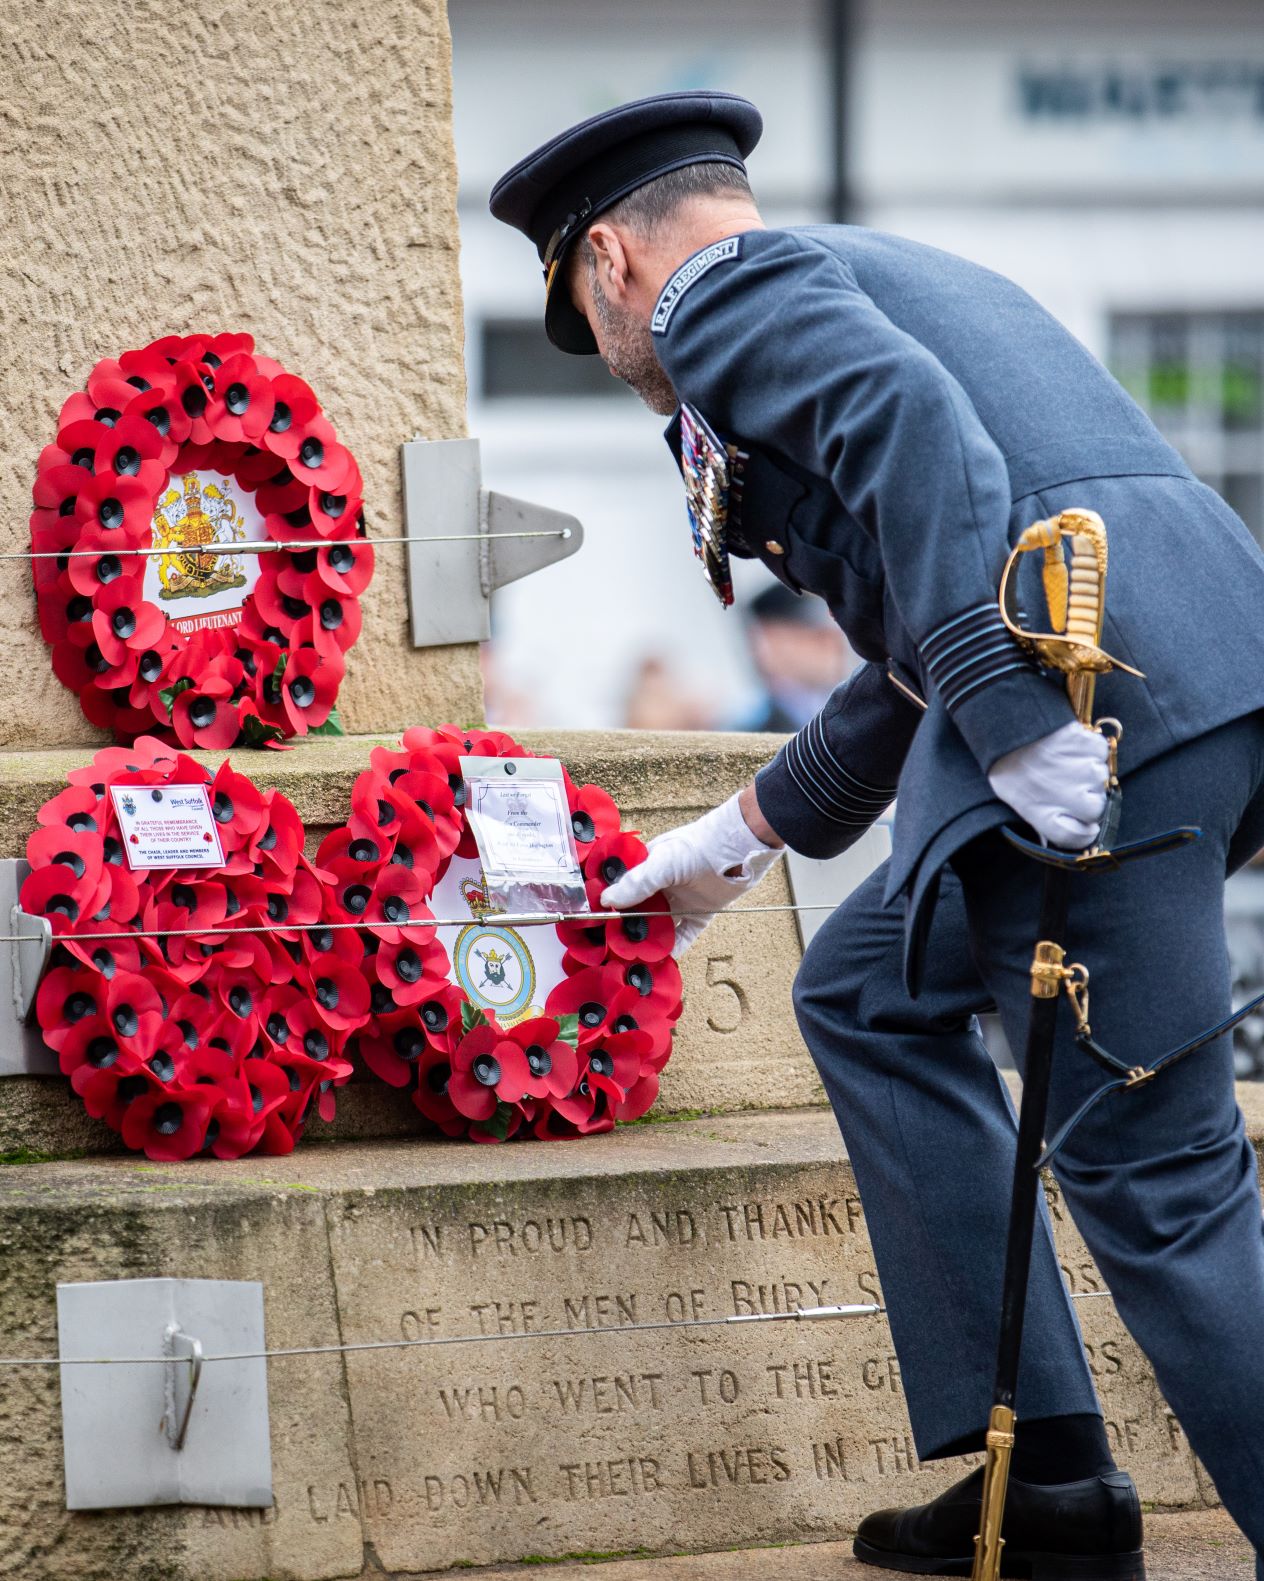 Image shows RAF aviator laying wreath on memorial.